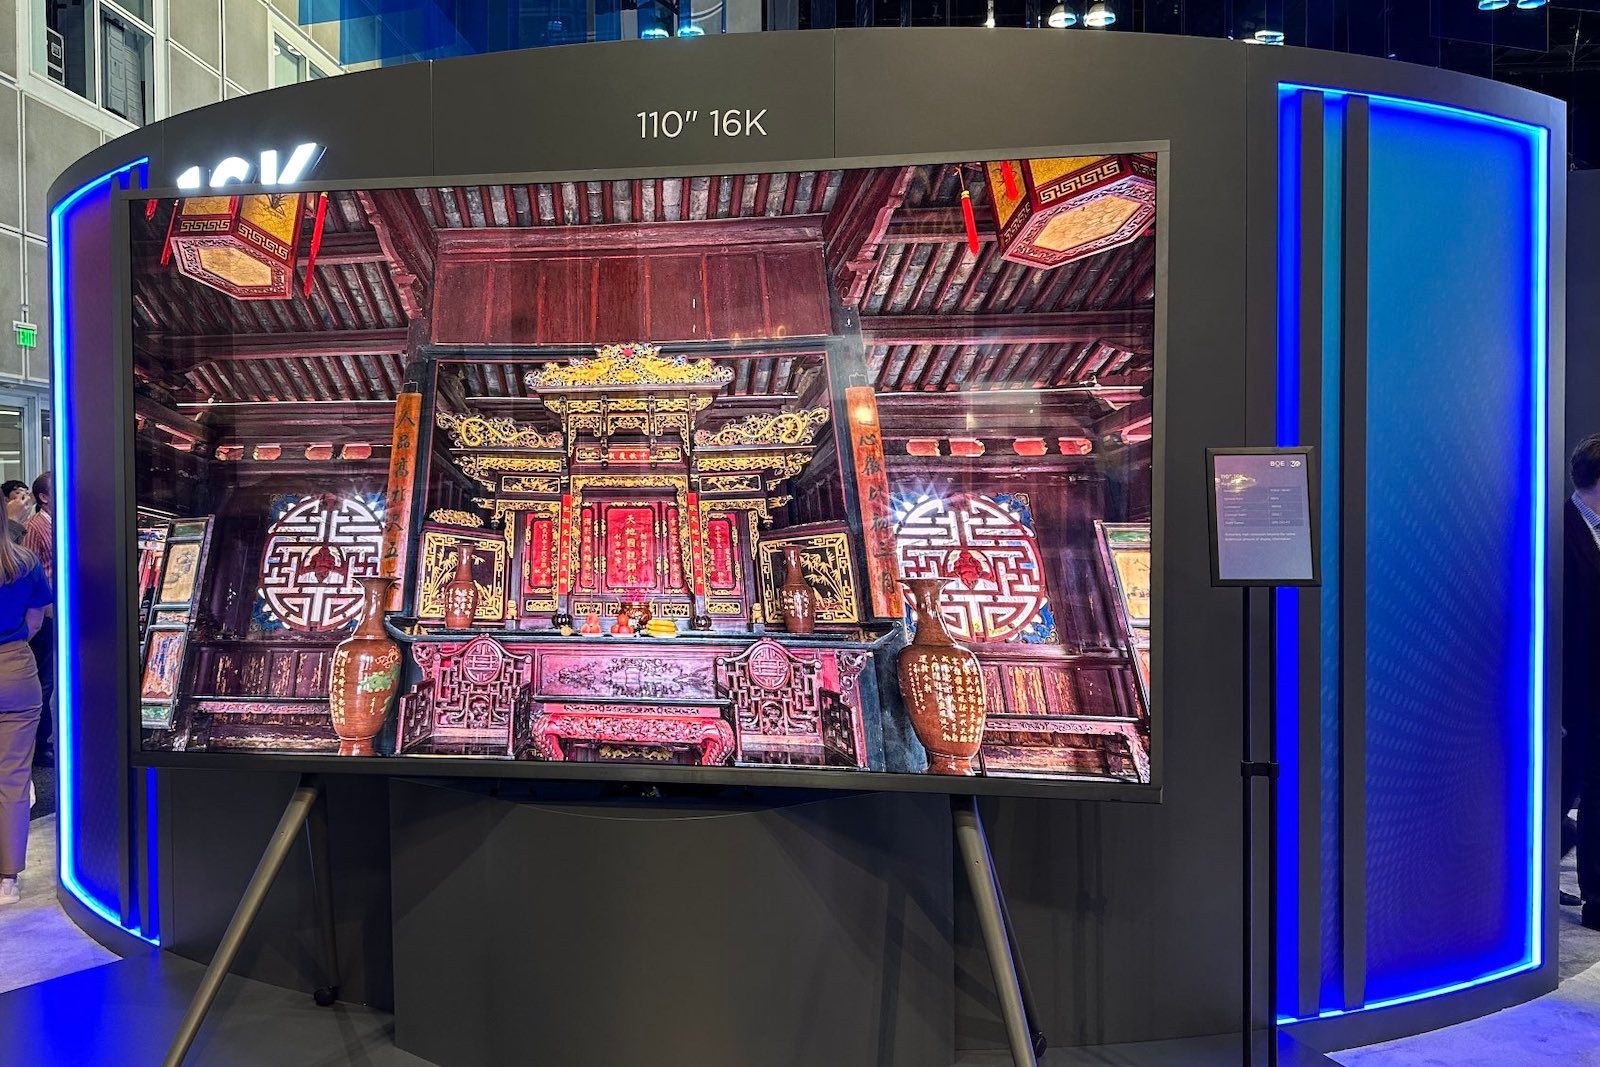 The world's first 16K TV looks great, so why am I not excited?